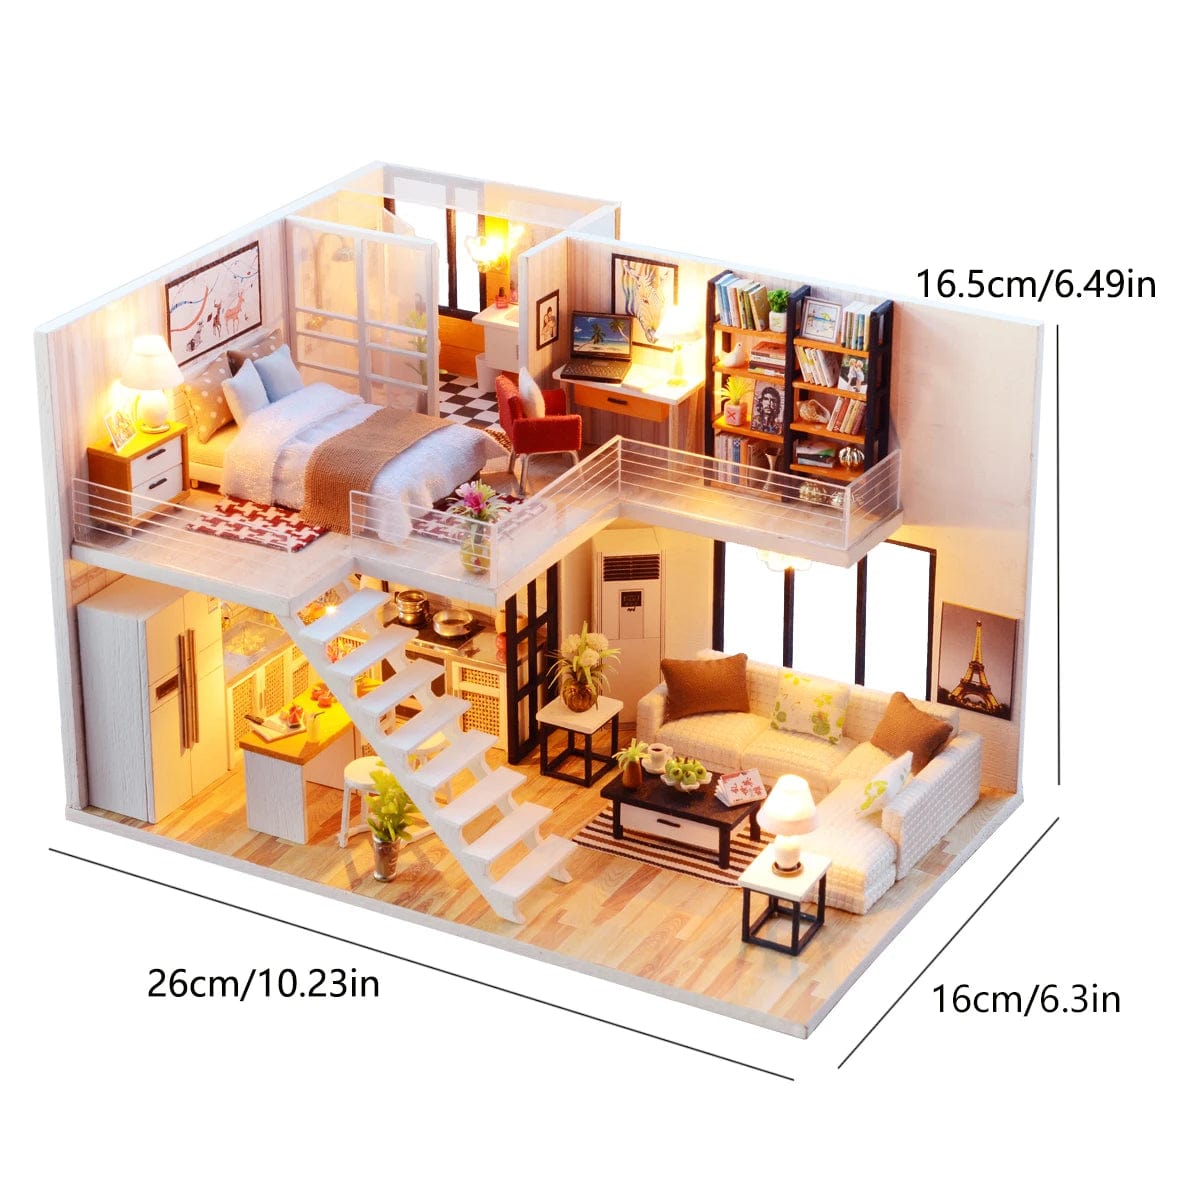 Pièces d'Exceptions Baby House Mini Miniature Doll  DIY Small  Kit Making Room Toys, Home Bedroom Decorations with Furniture, Wooden Craft